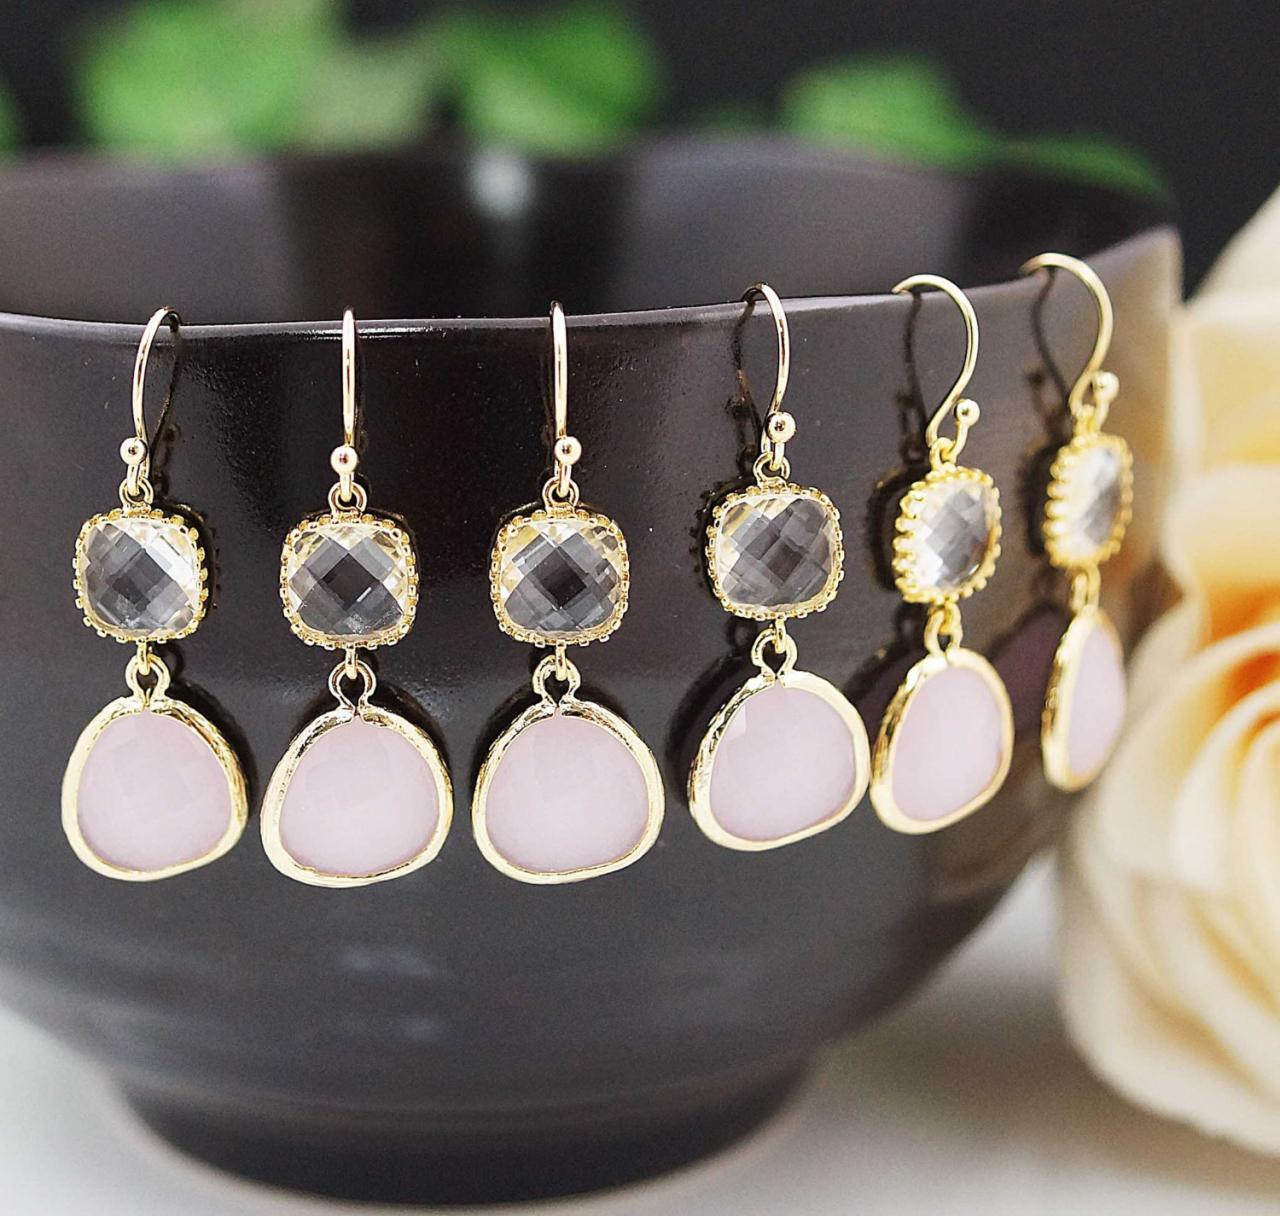 Wedding Jewelry Bridesmaid Earrings Dangle Earrings Gold Framed clear white and pink opal icy pink glass drop Earrings